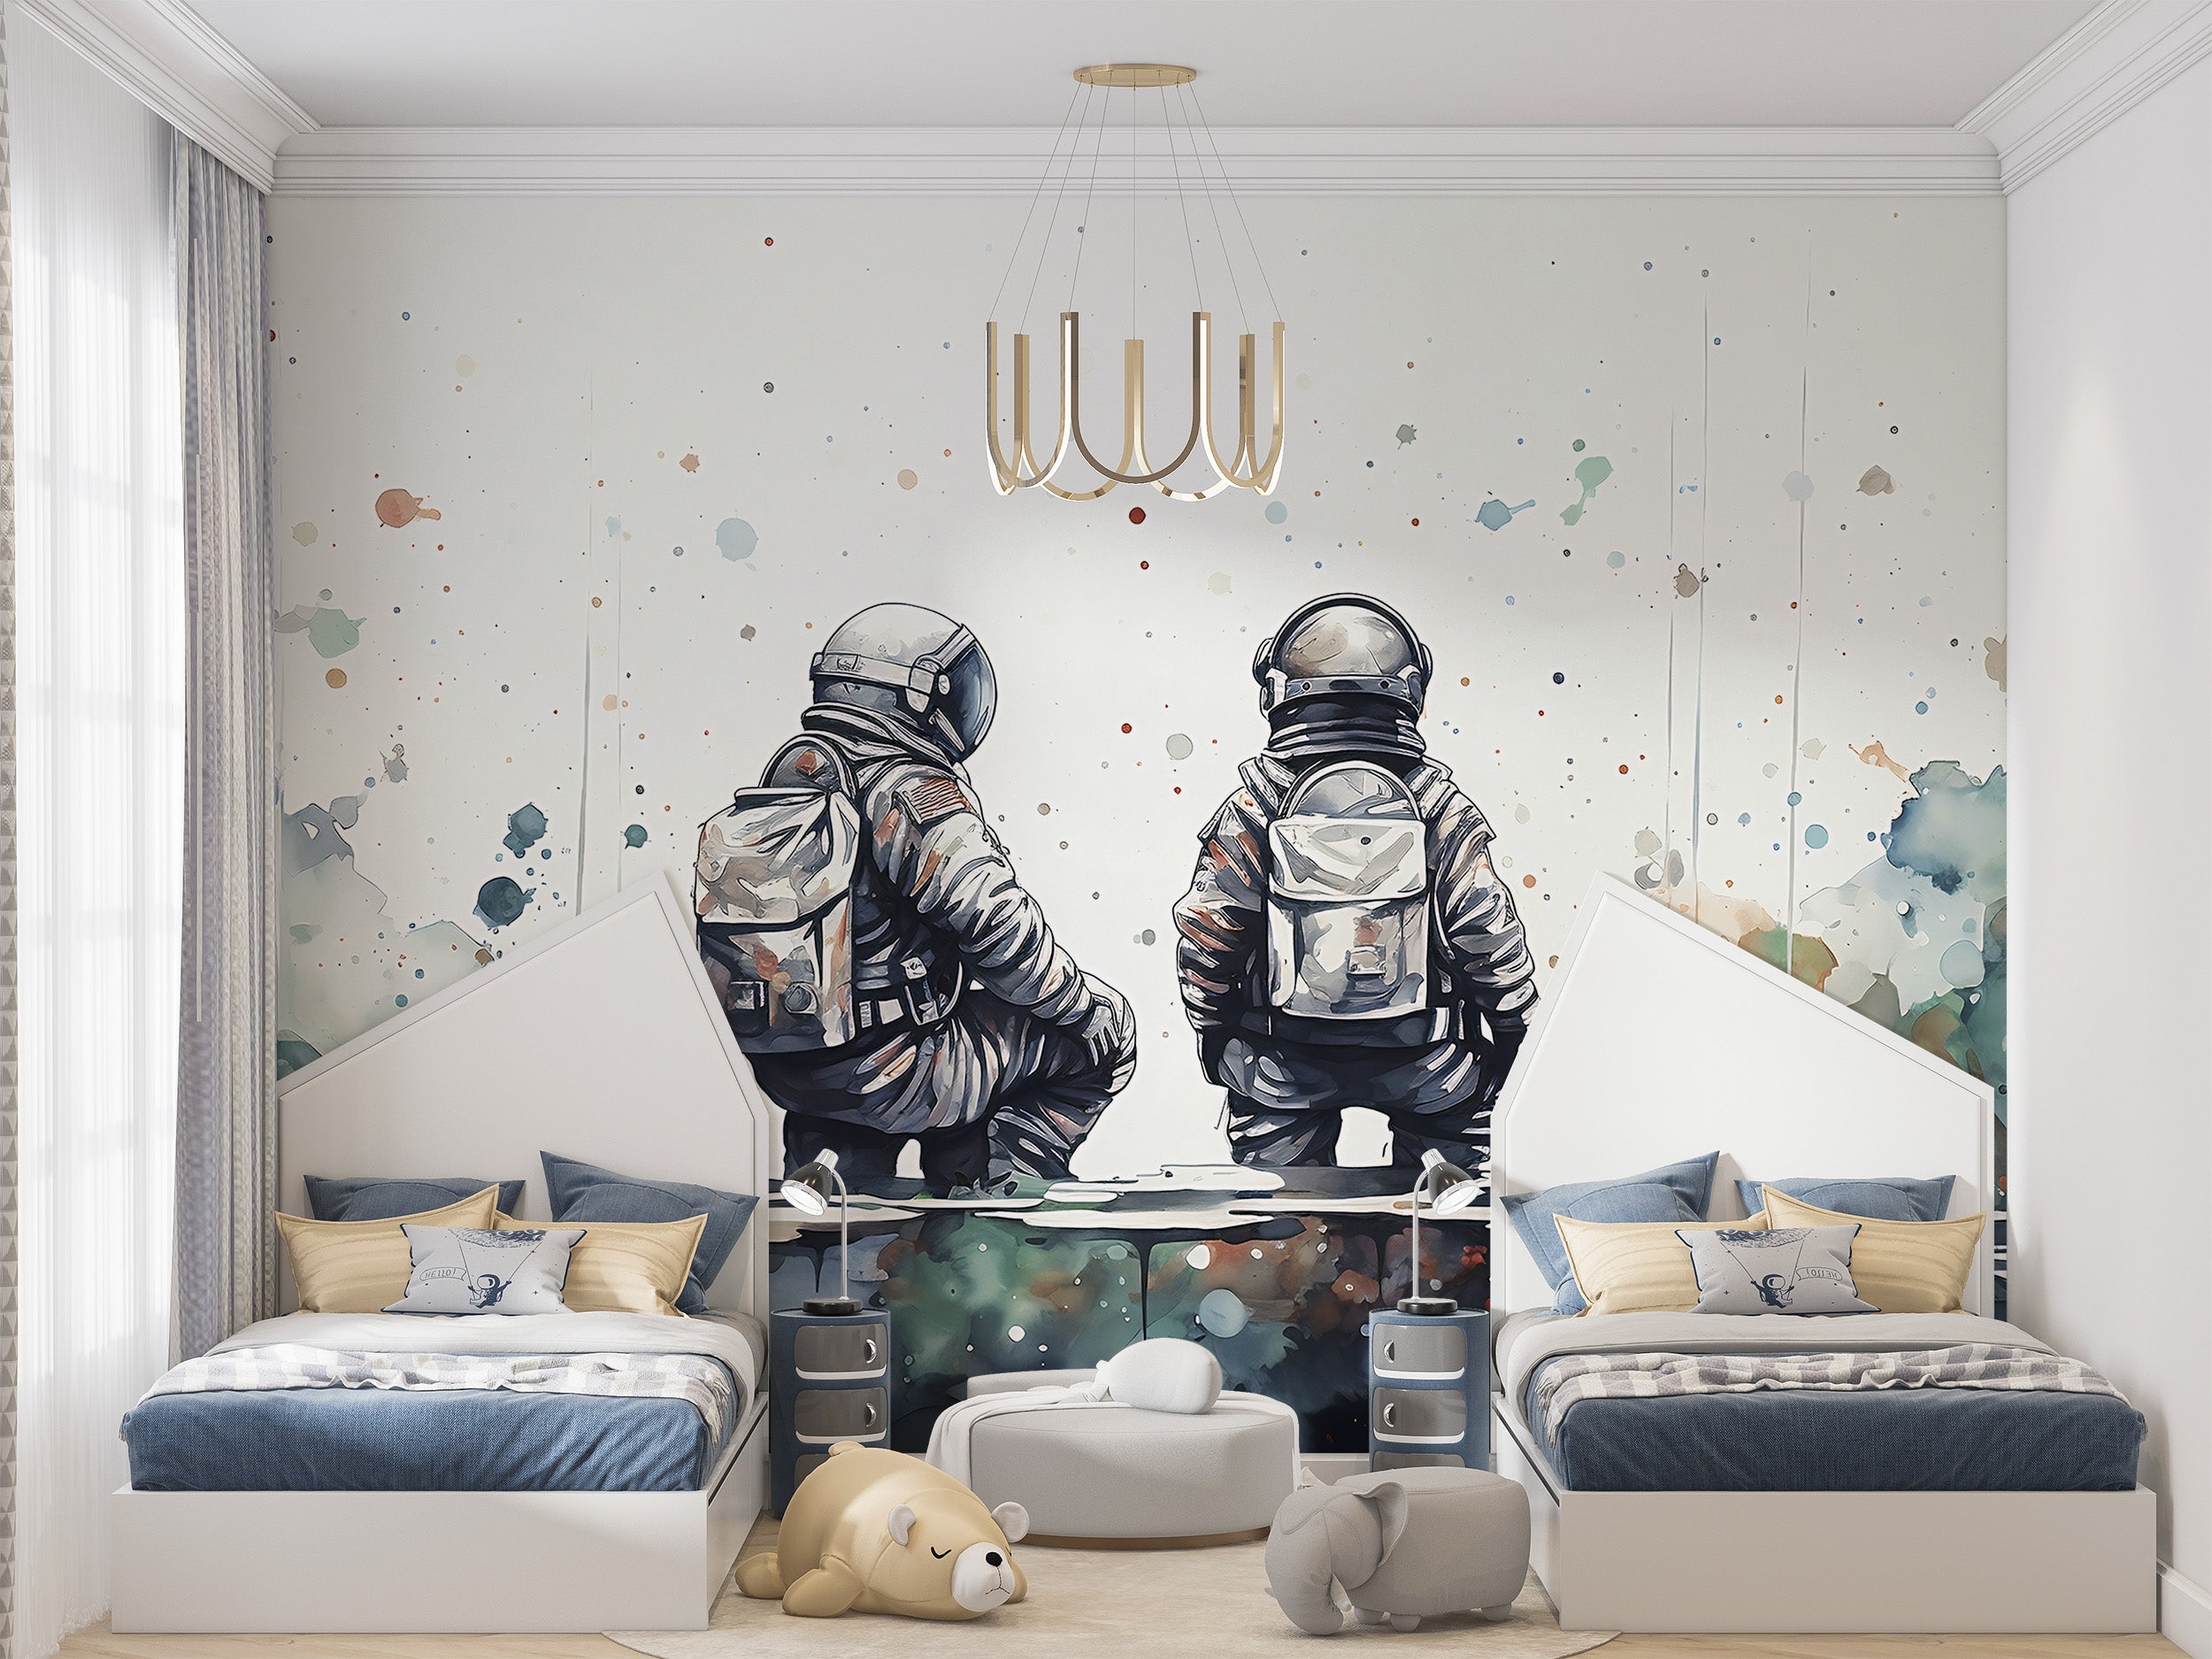 Space Mural for Cosmic Room Ambiance